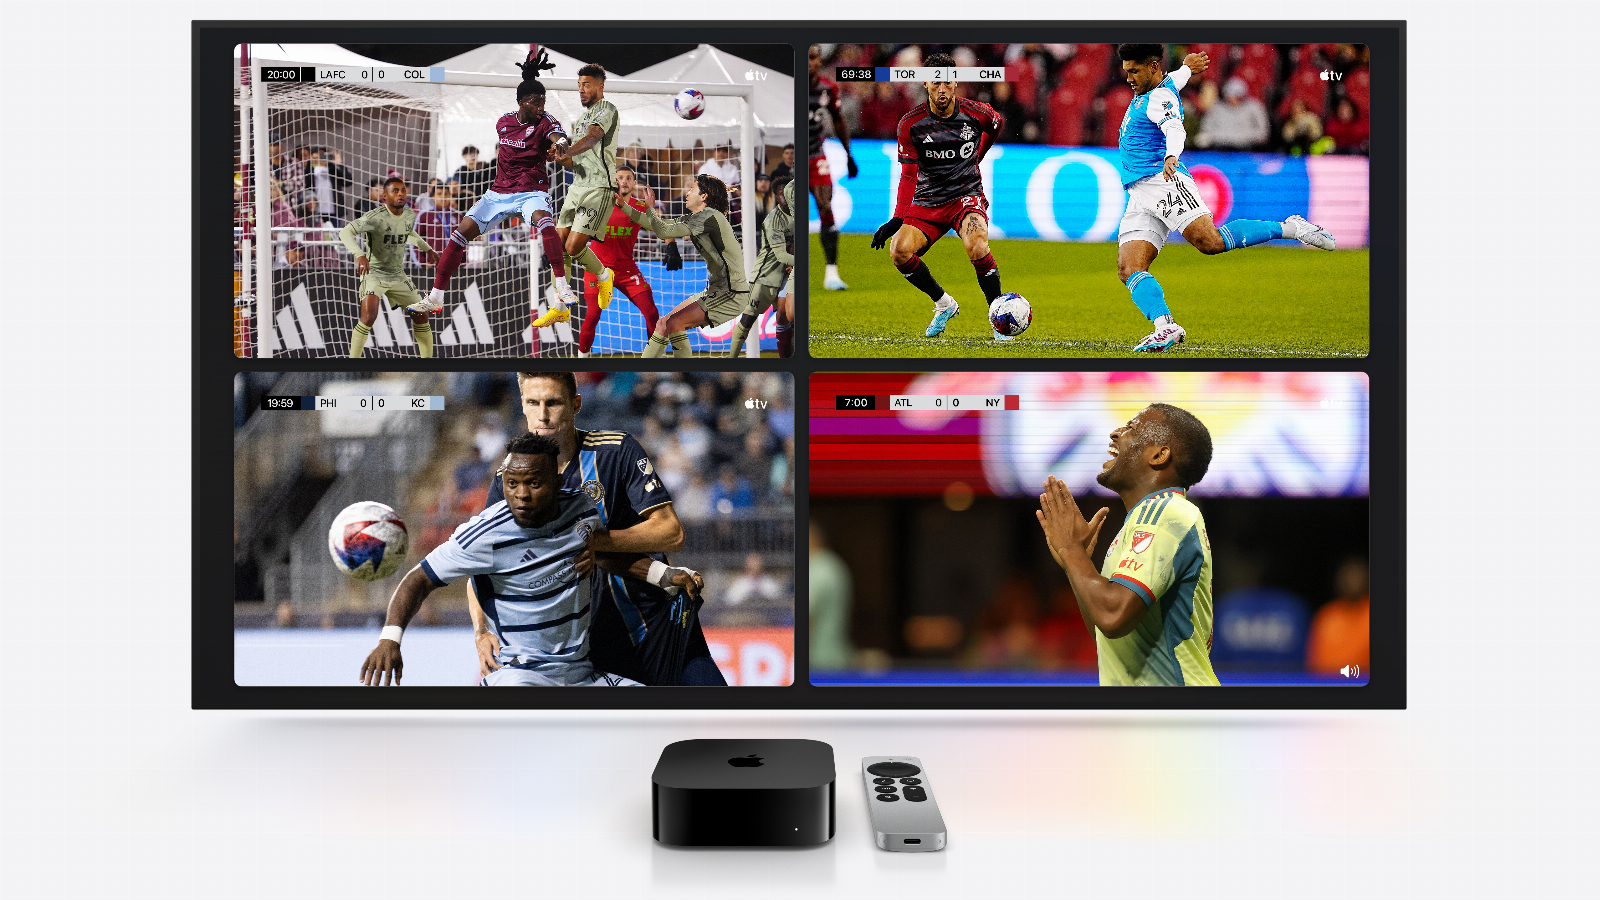 Apple TV officially launches its multiview feature for sports fans